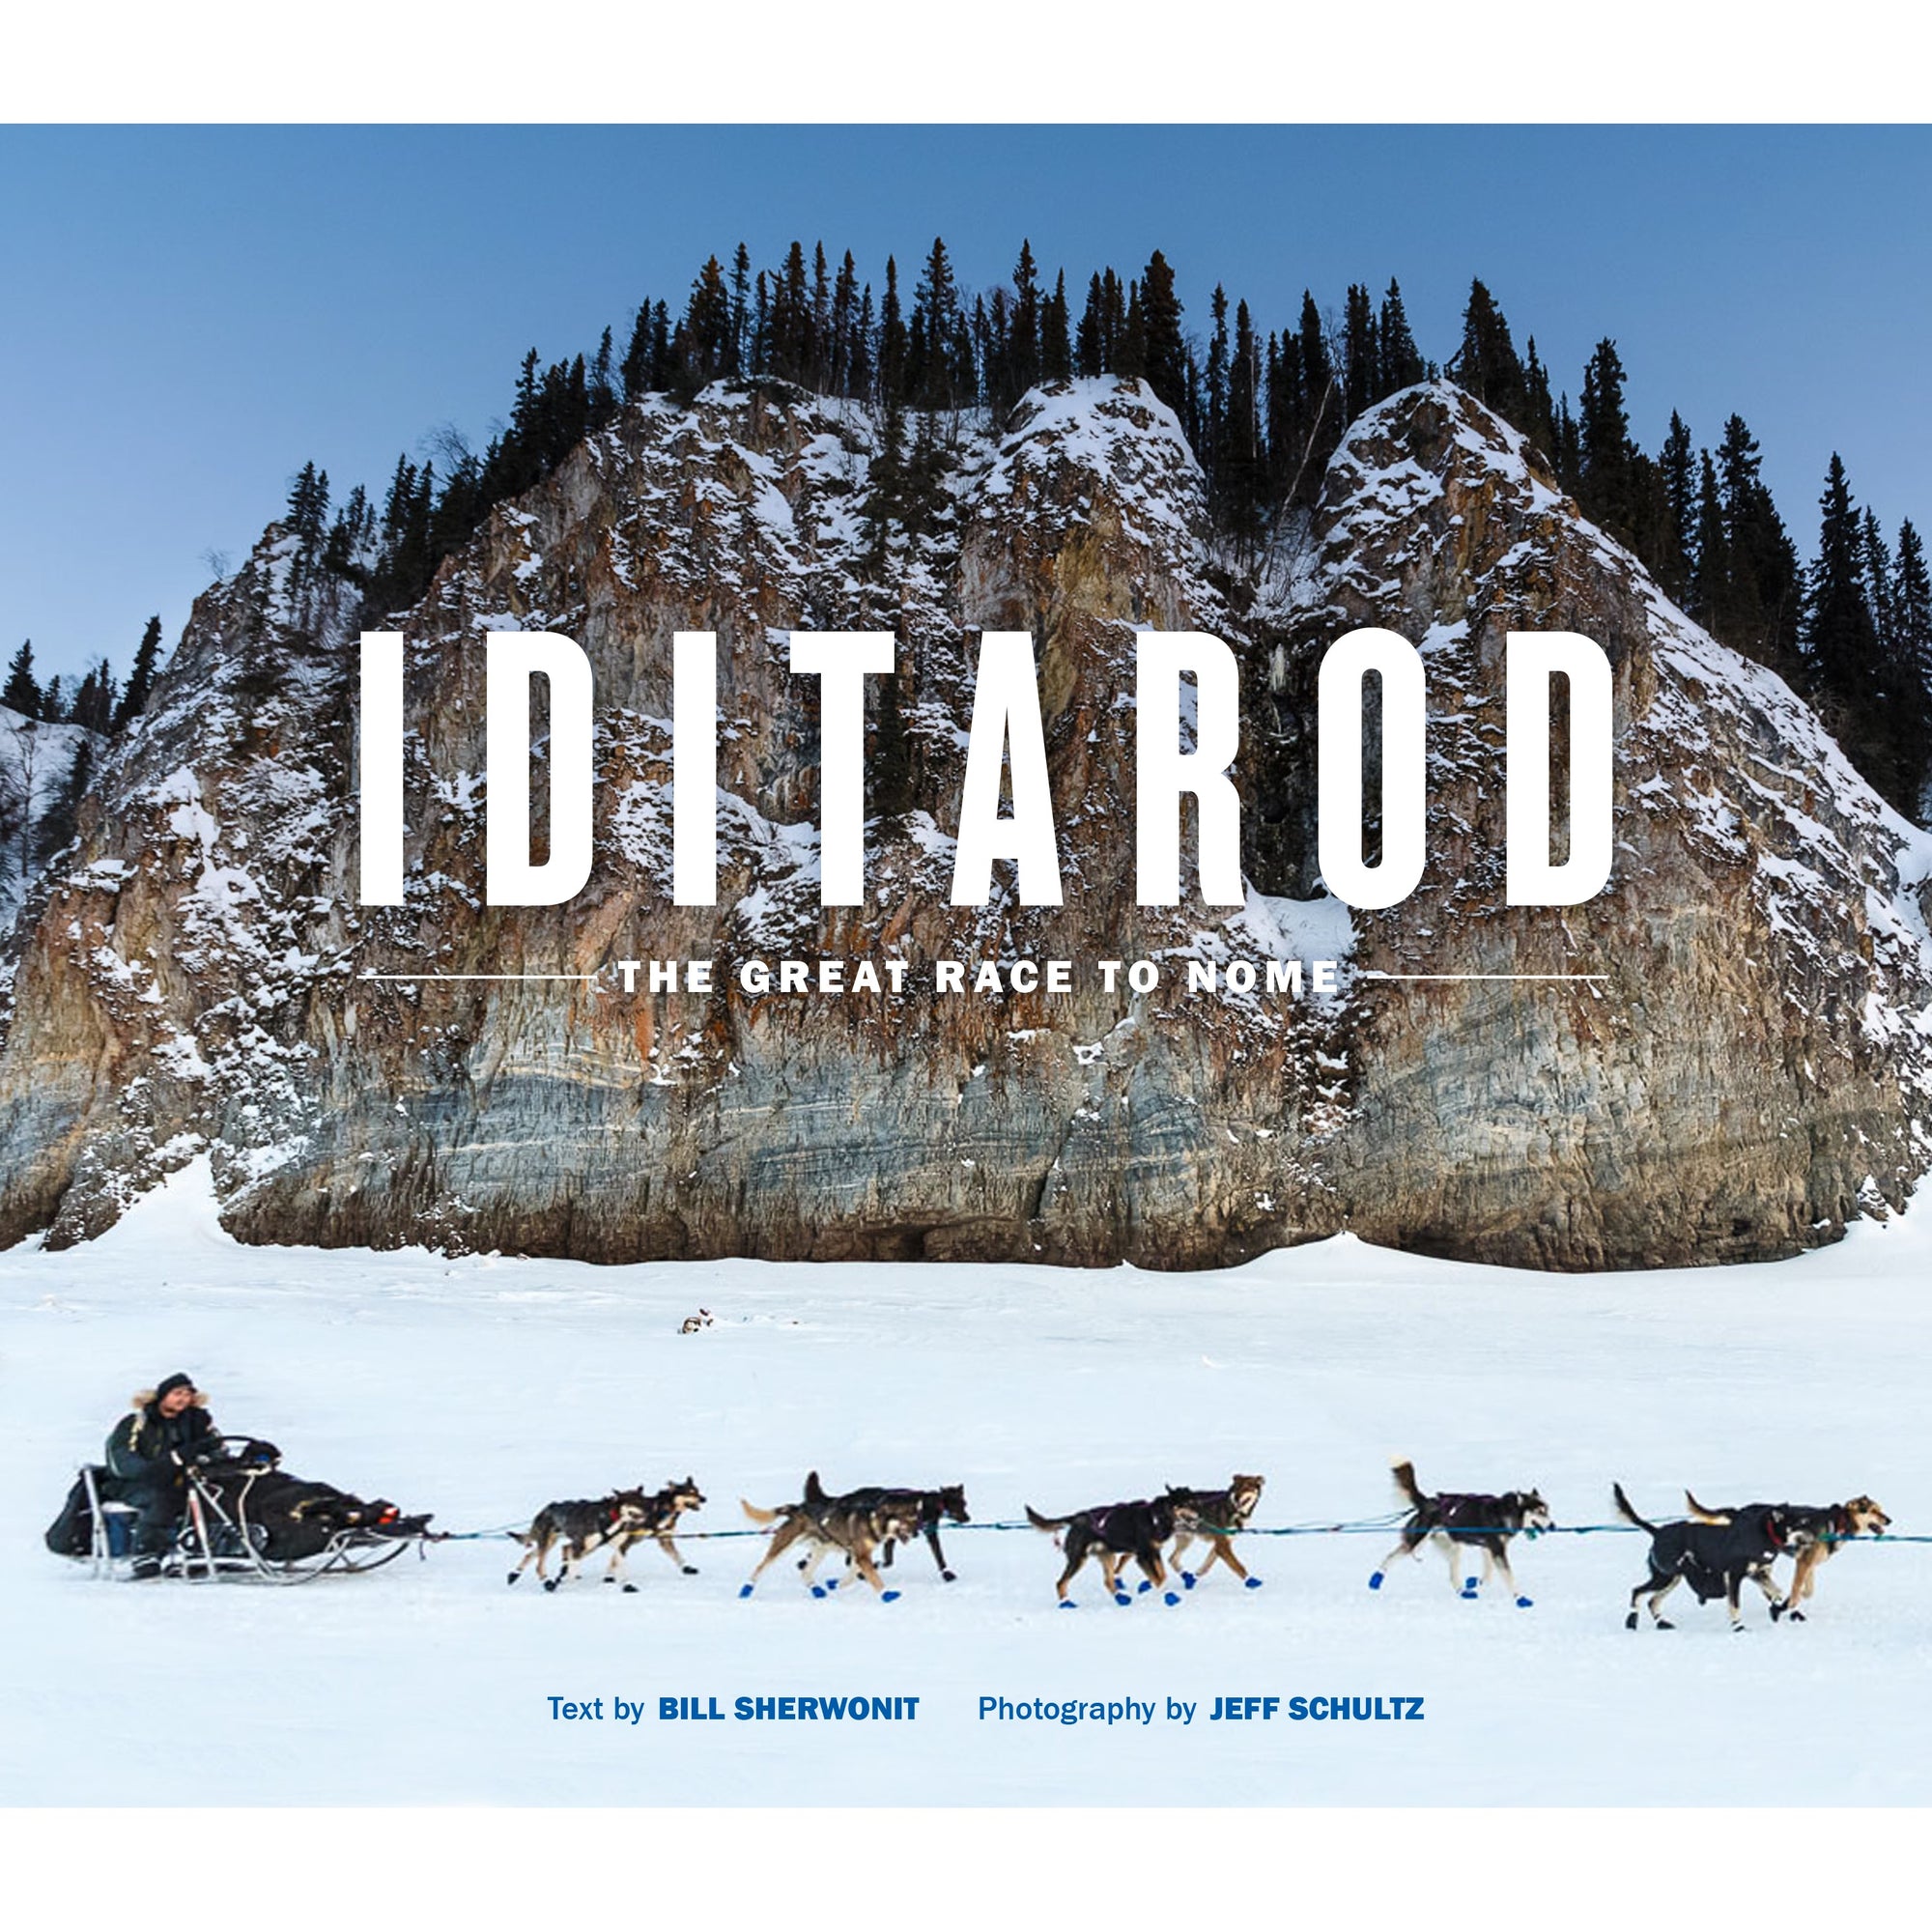 Iditarod - The Great Race To Nome By Bill Sherwonit